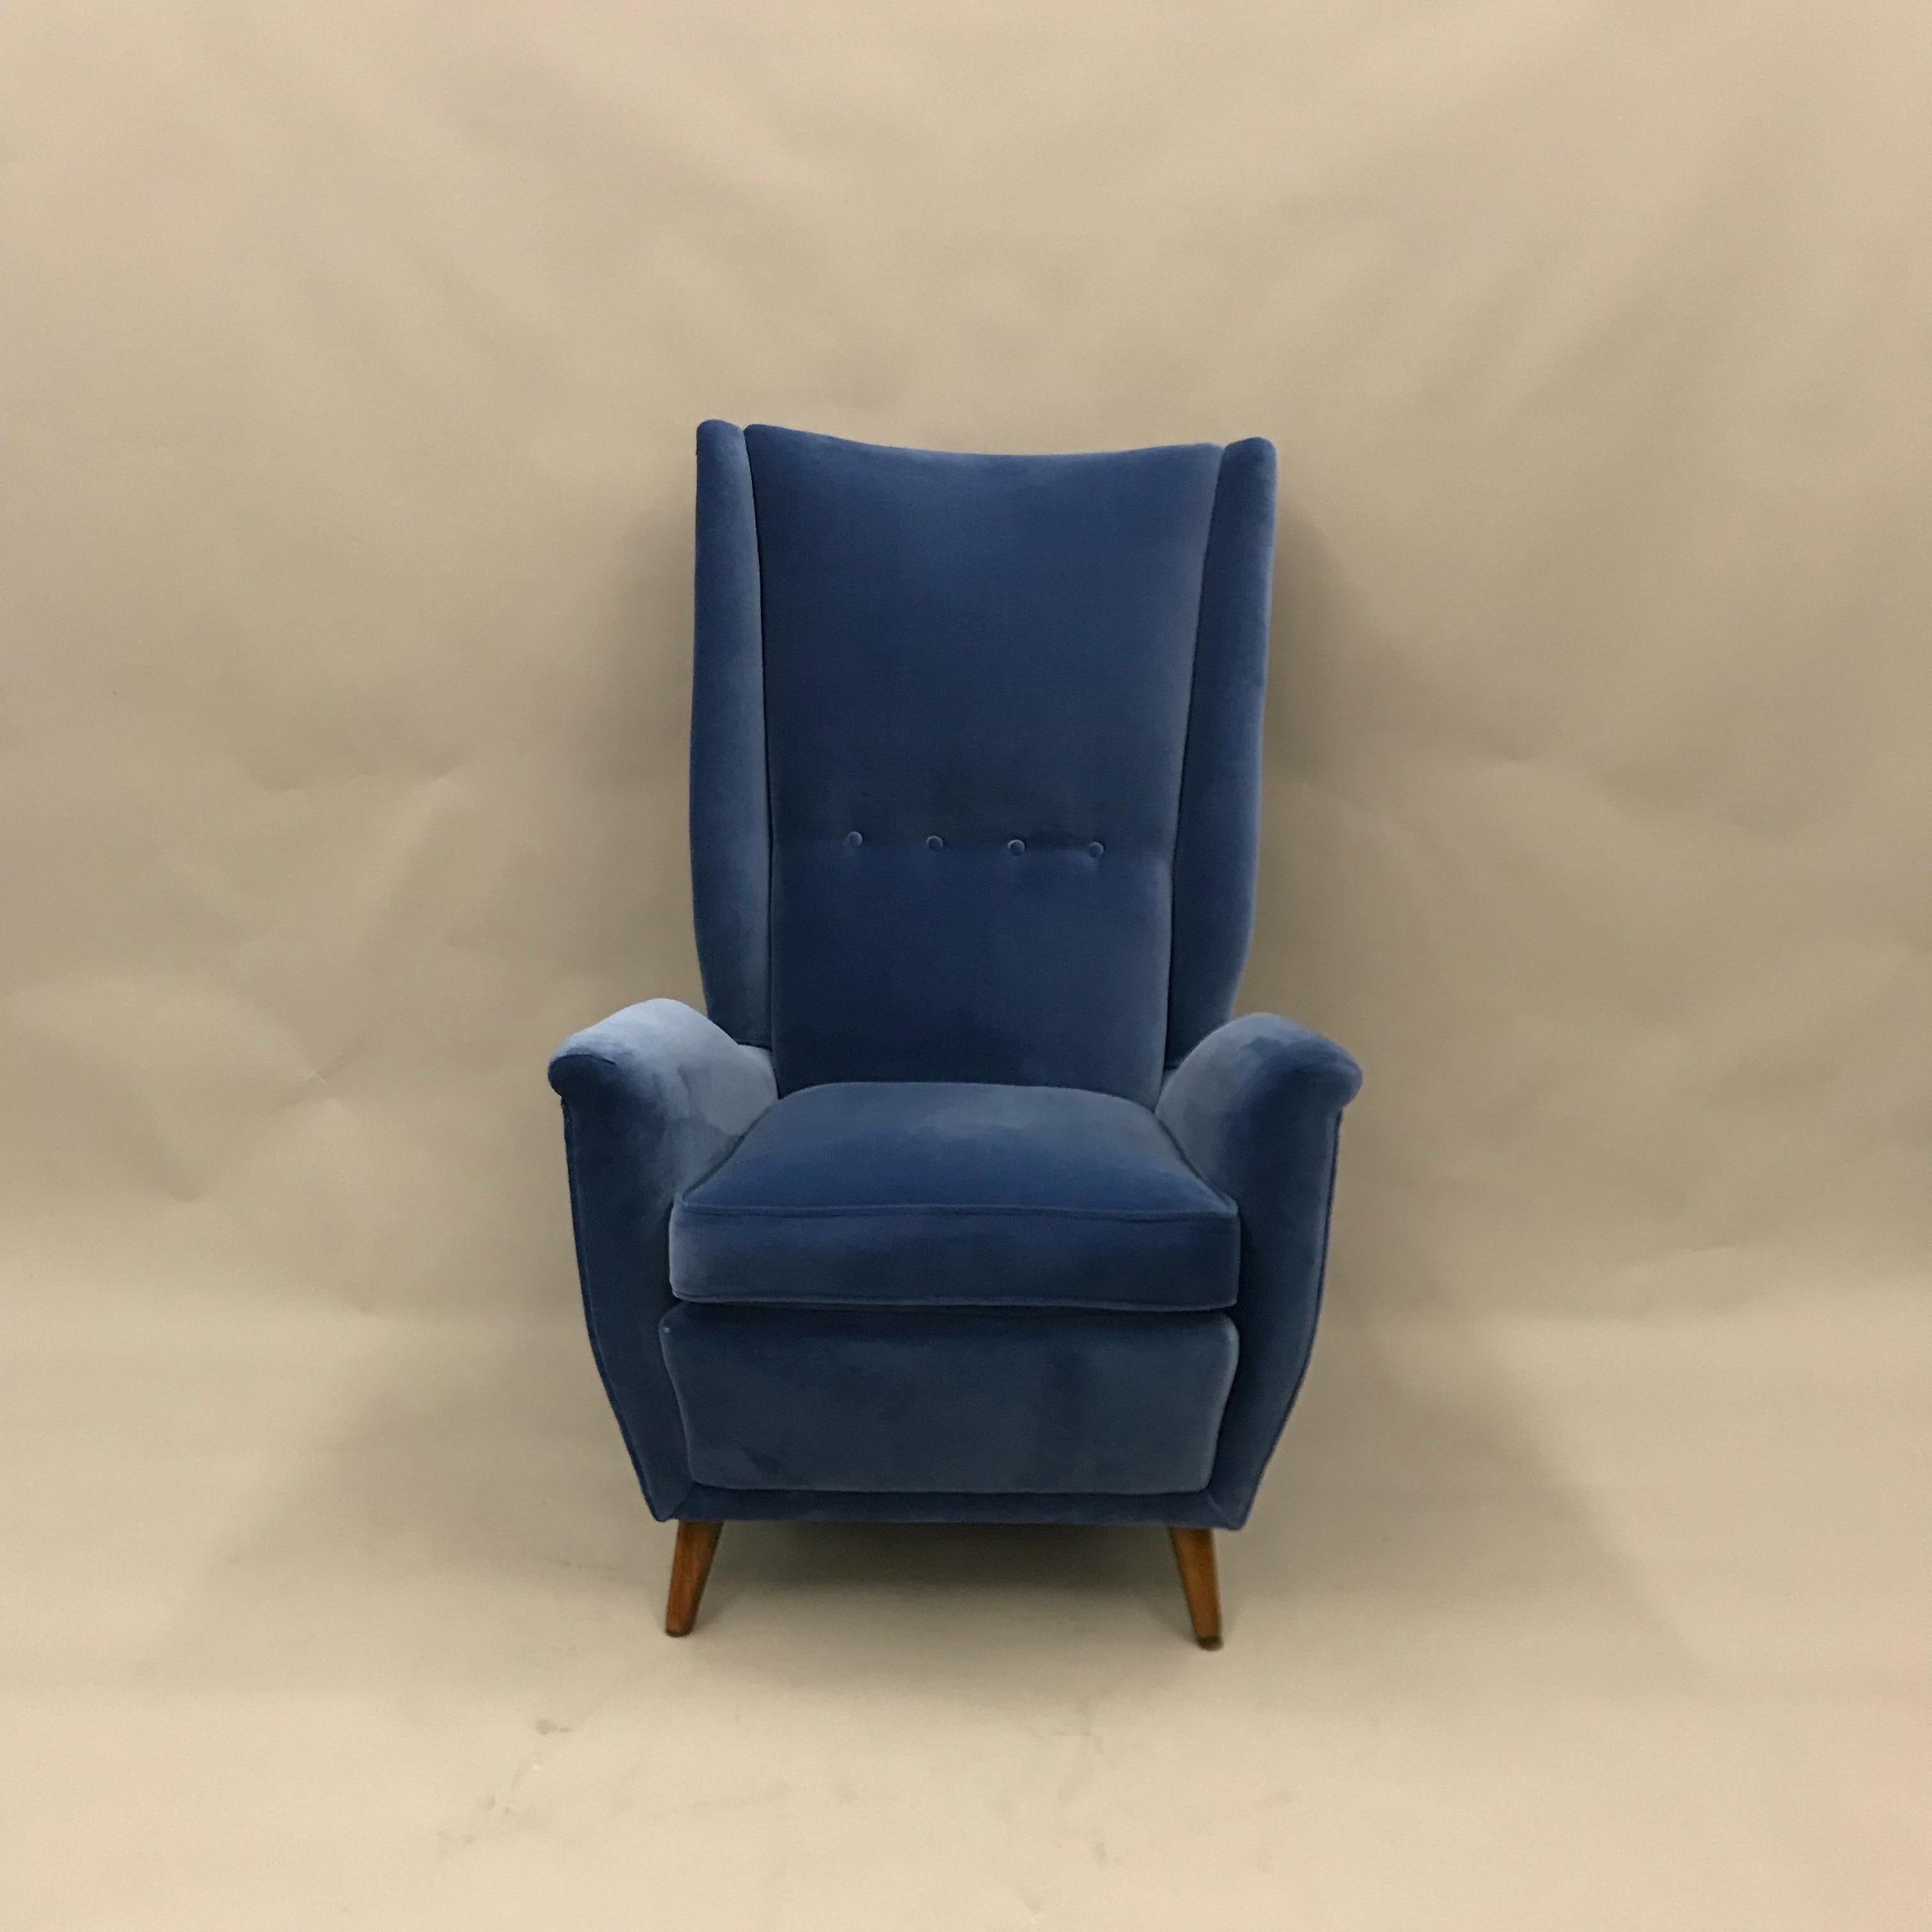 Gorgeous Gio Ponti armchair by ISA Bergamo completely reupholstery inside/outside in professional way with Designers Guild Varese cotton velvet, feet in walnut wood this model is particularly comfortable by the high back and design.
This model was